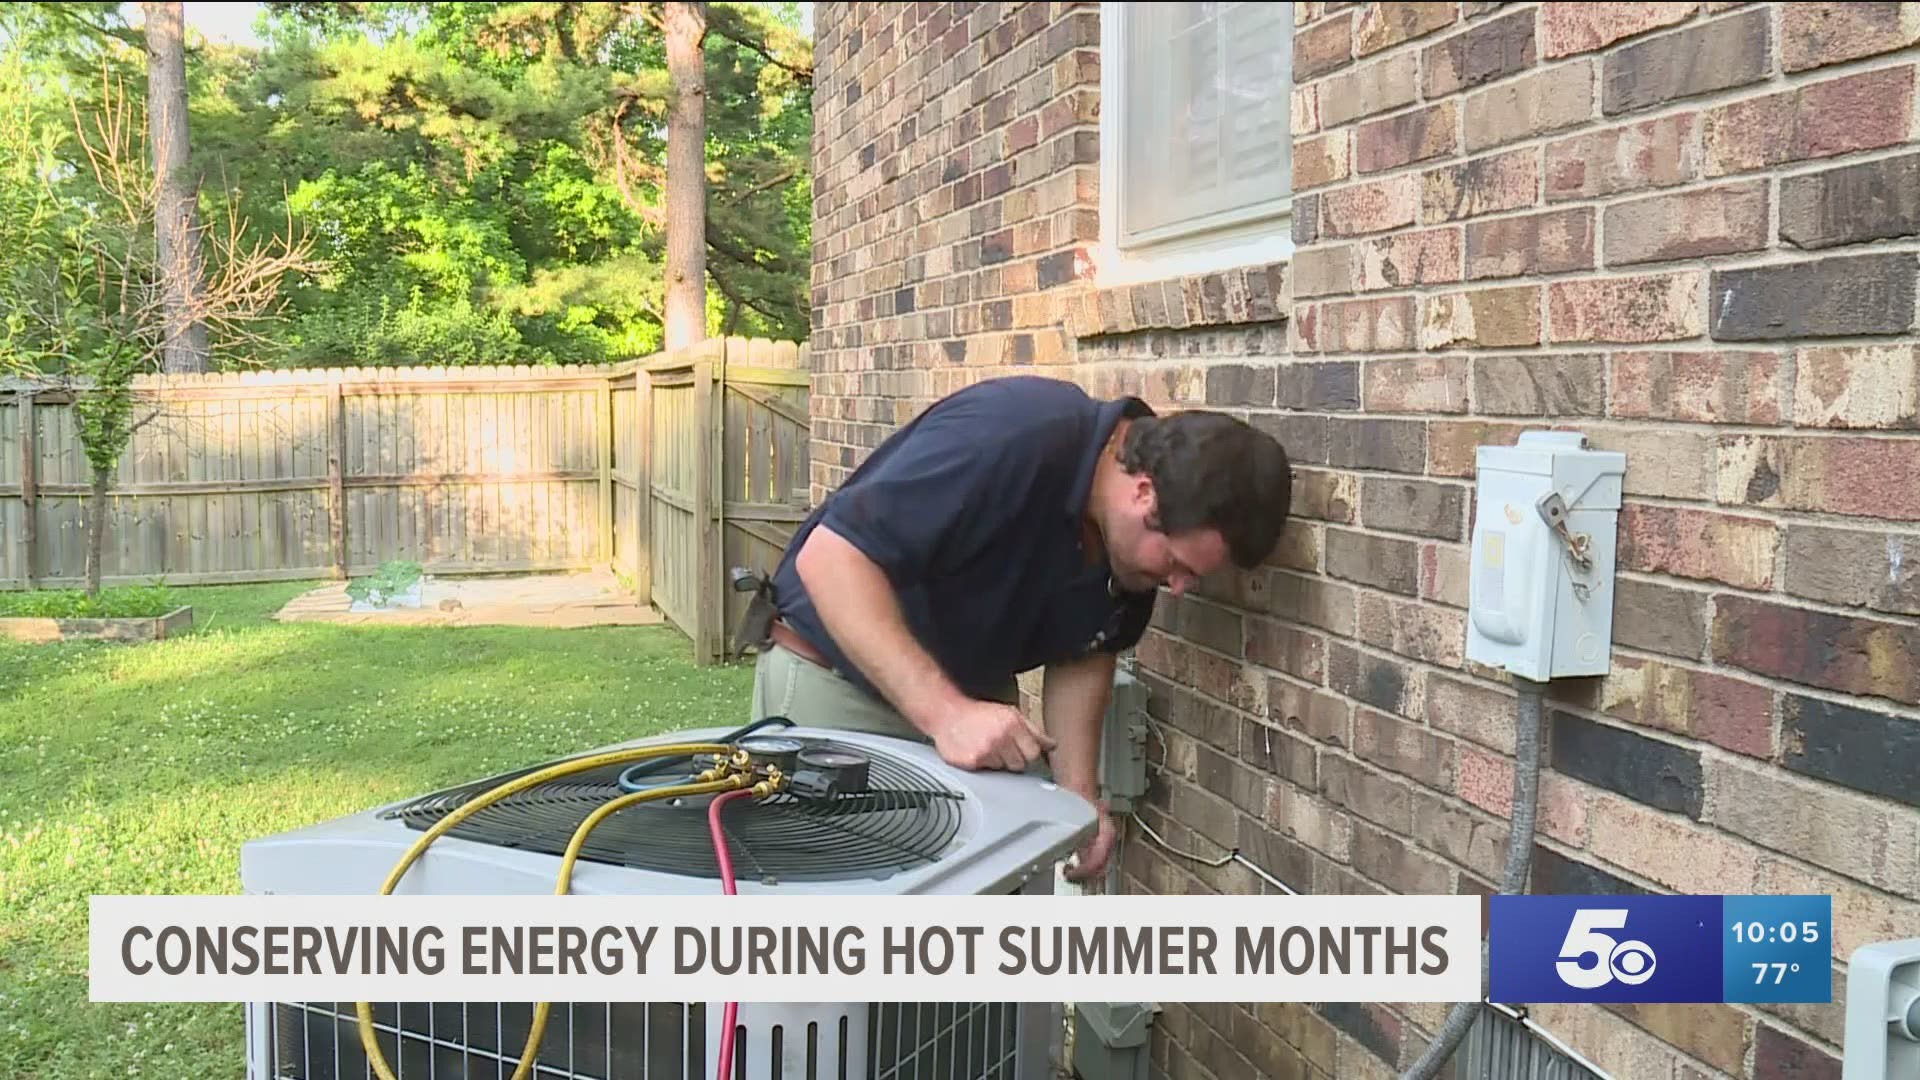 A heatwave is straining Texas' energy resources, creating a second potential power crisis only four months after the last one.